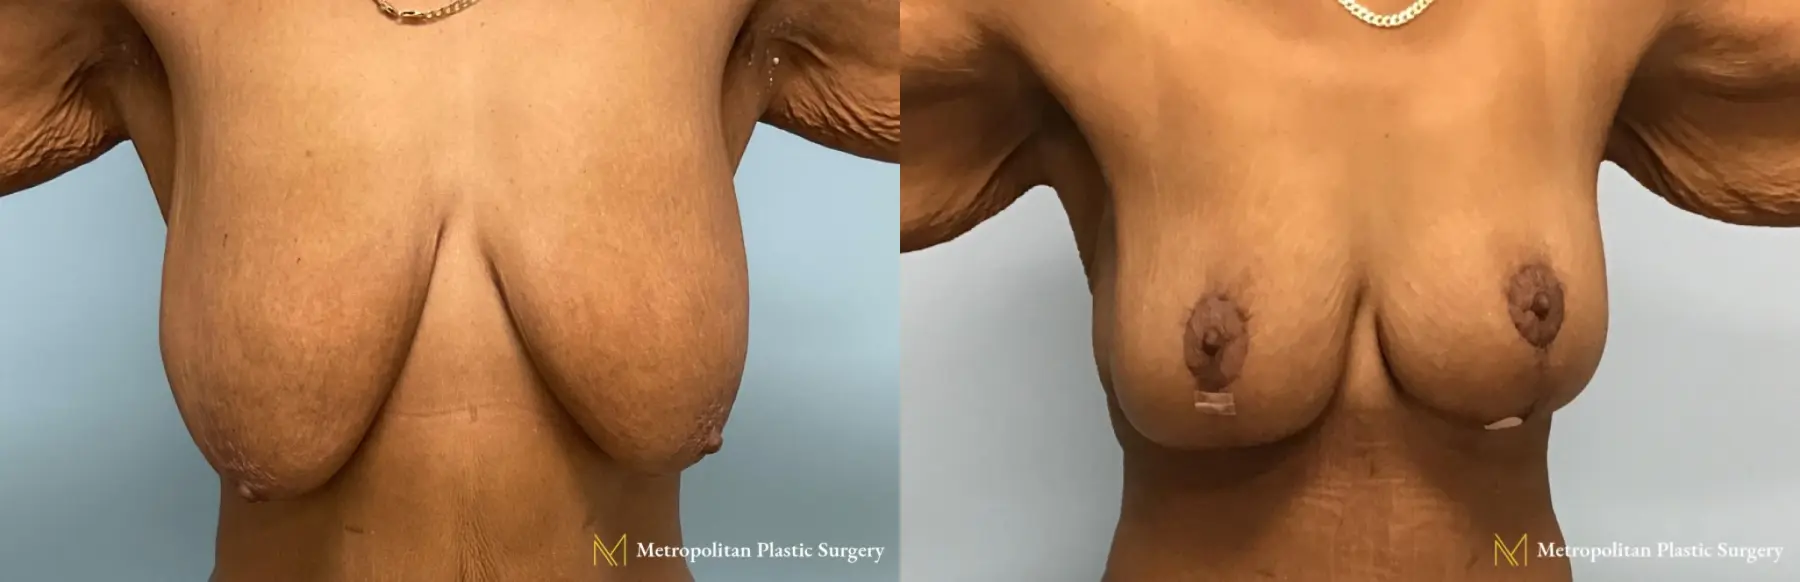 Before and after breast lift surgery by Julia Spears MD - Before and After